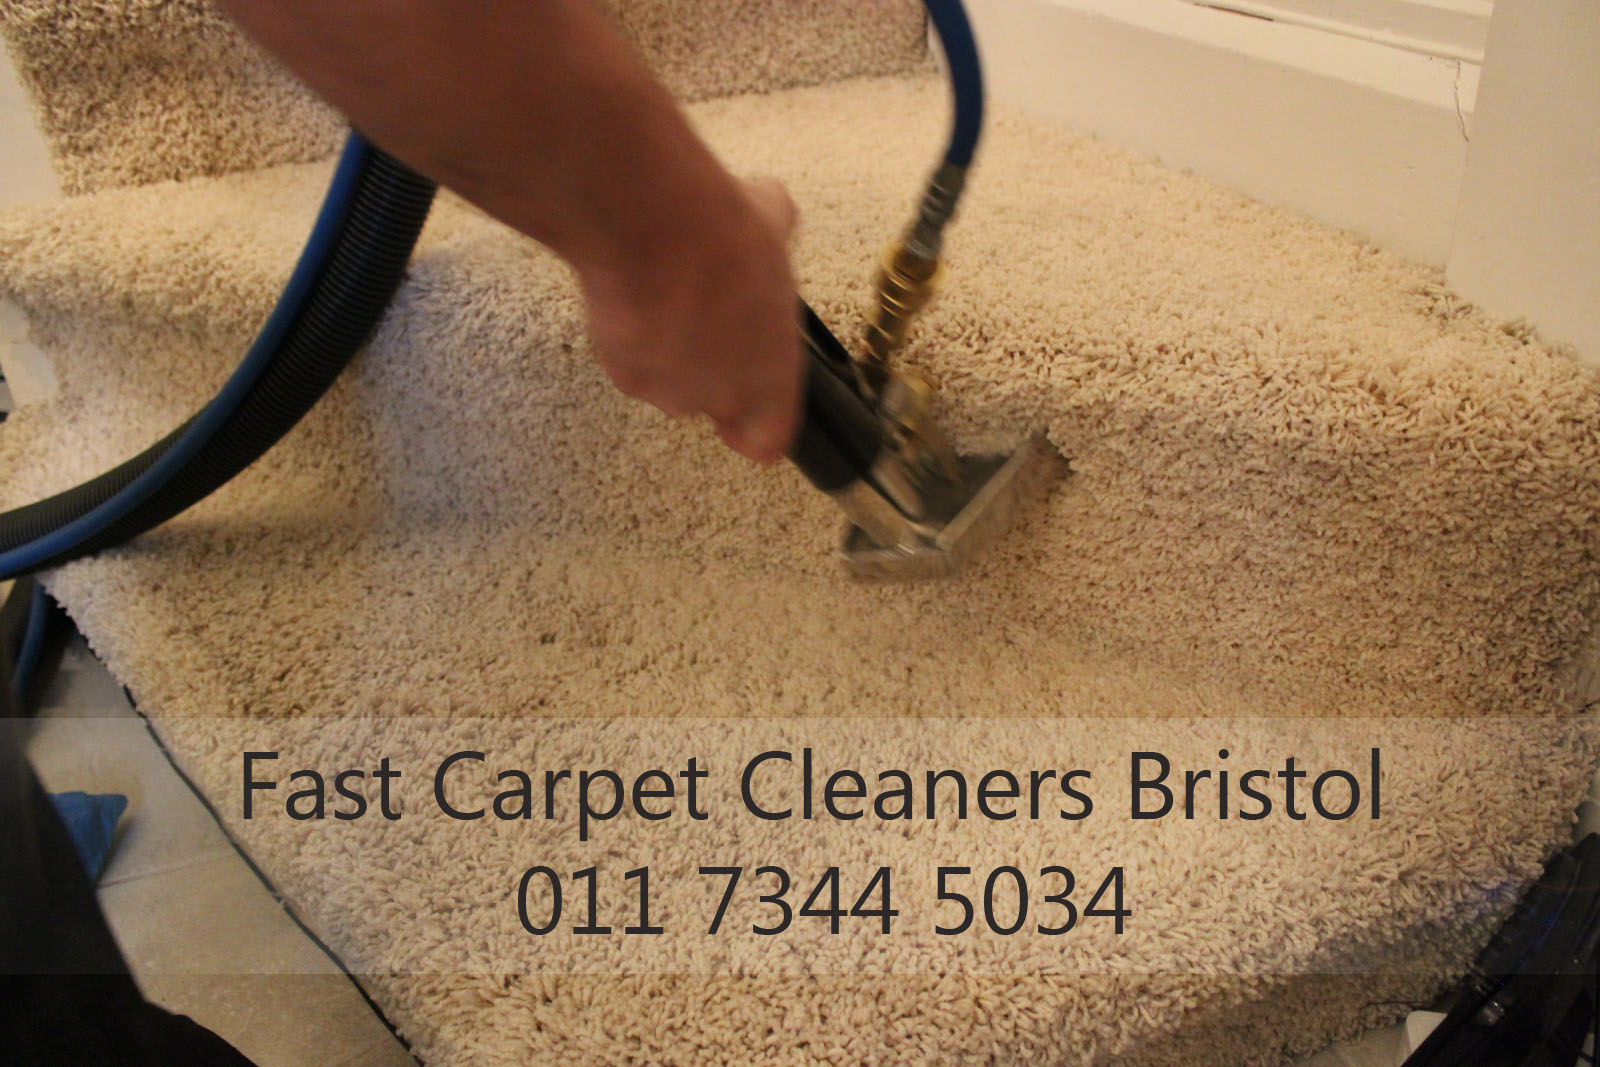 Carpet-Cleaning-Cleaners-Bristol